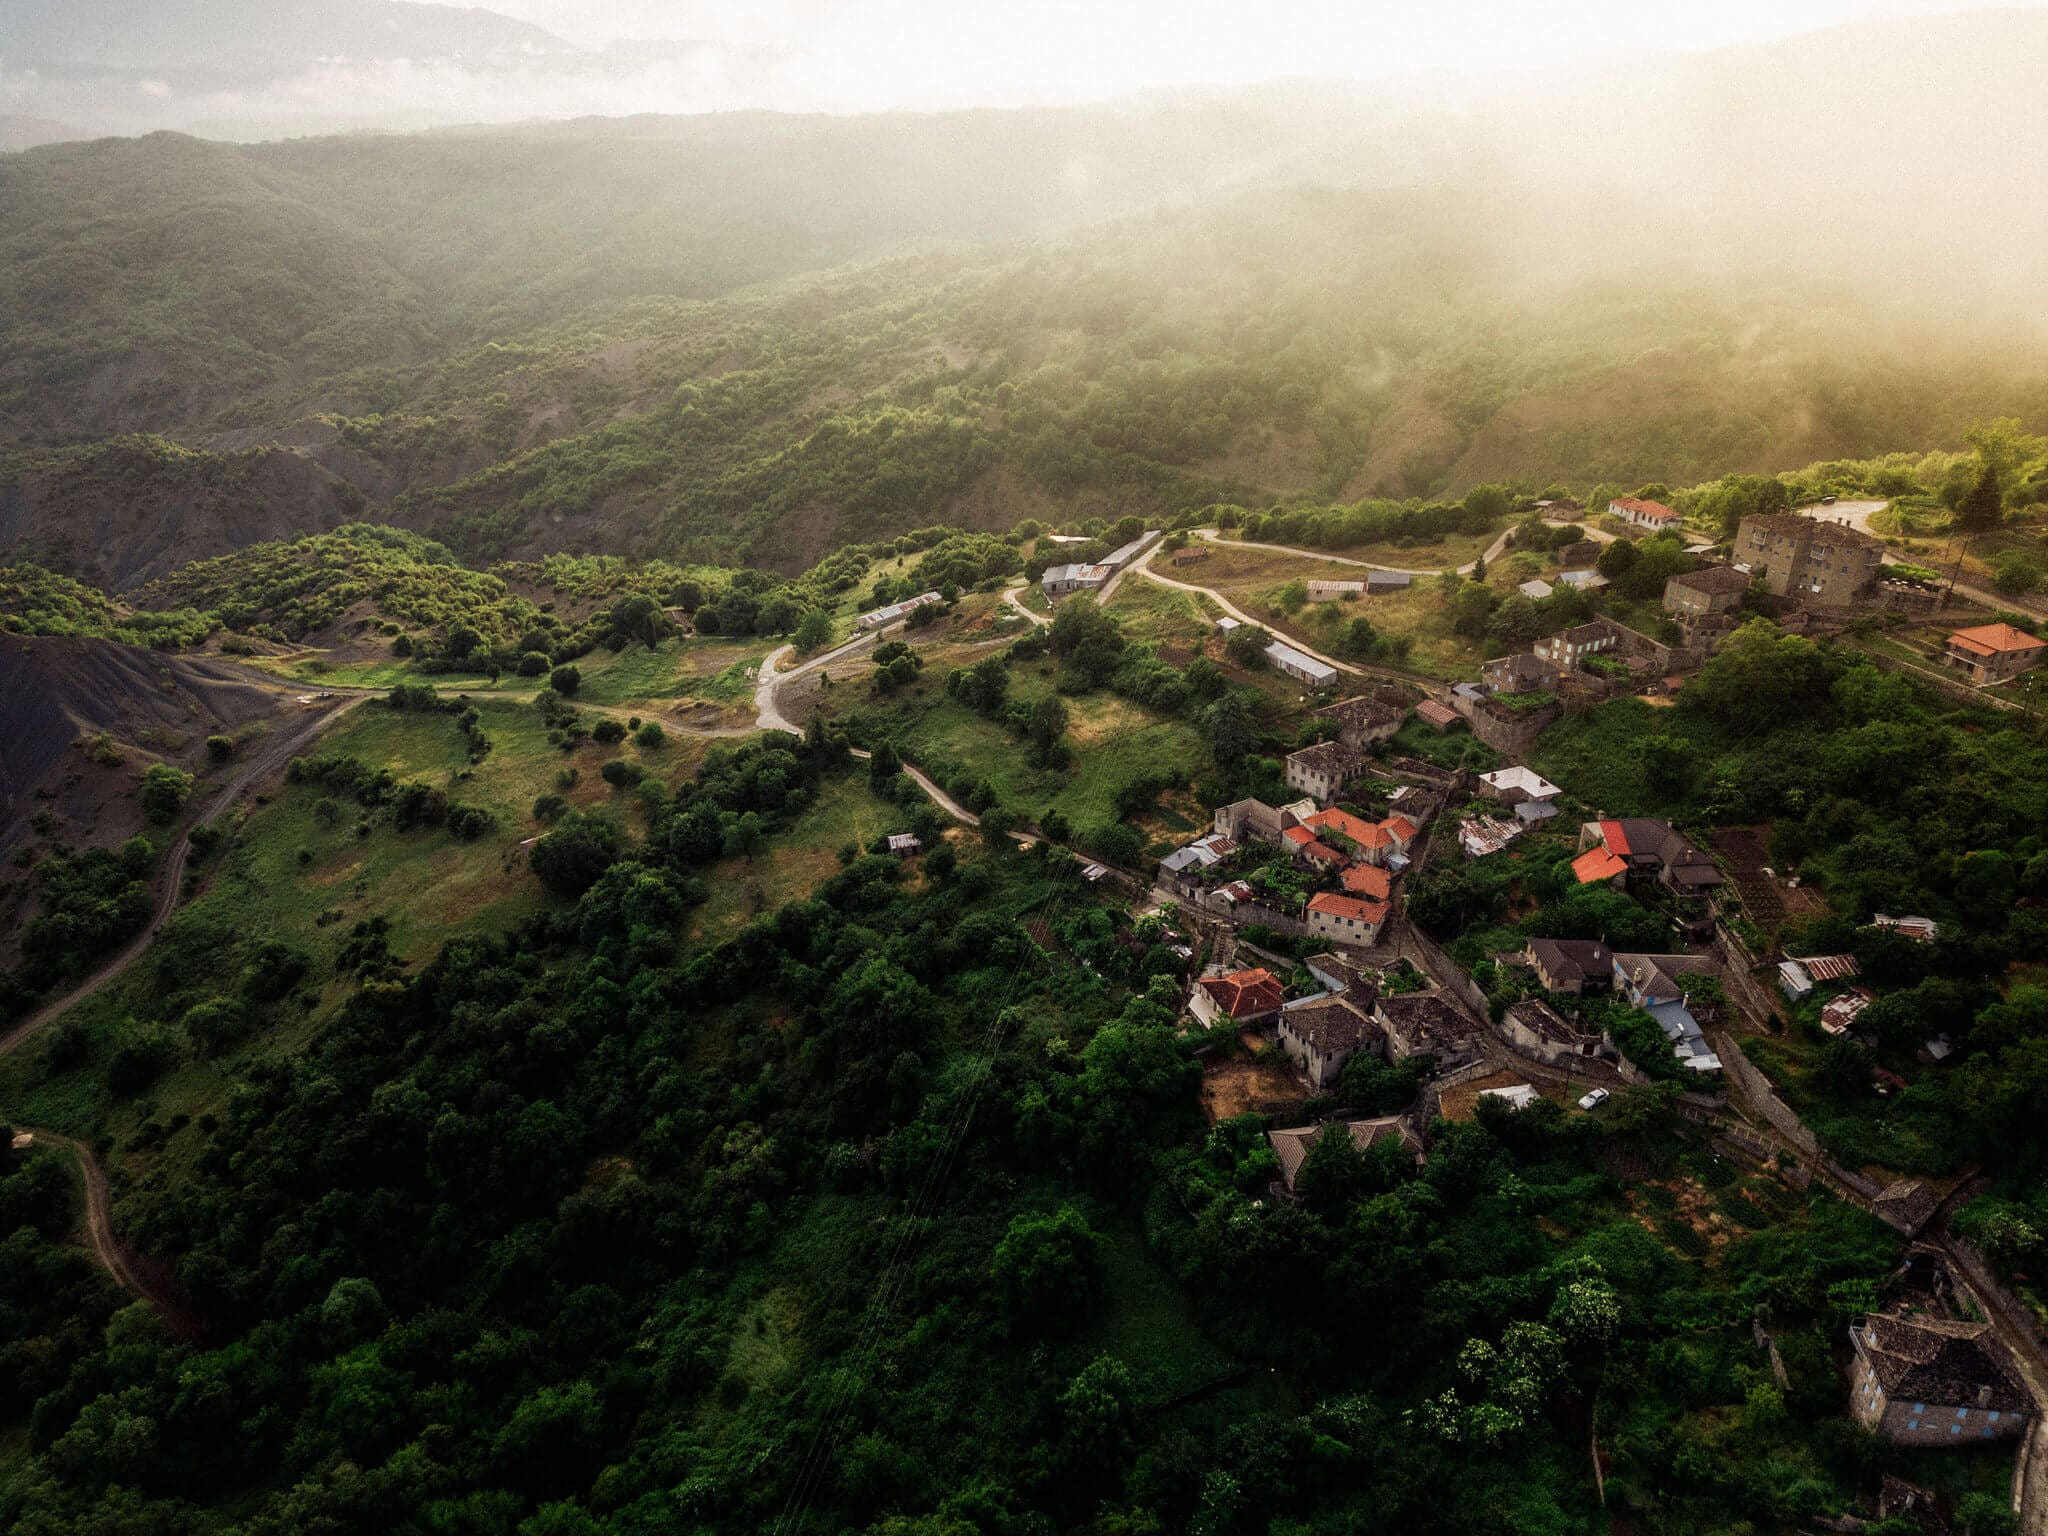 Looking down on stone villages in the mountains of Zagori, shrouded in mist on a Slow Cyclist journey.